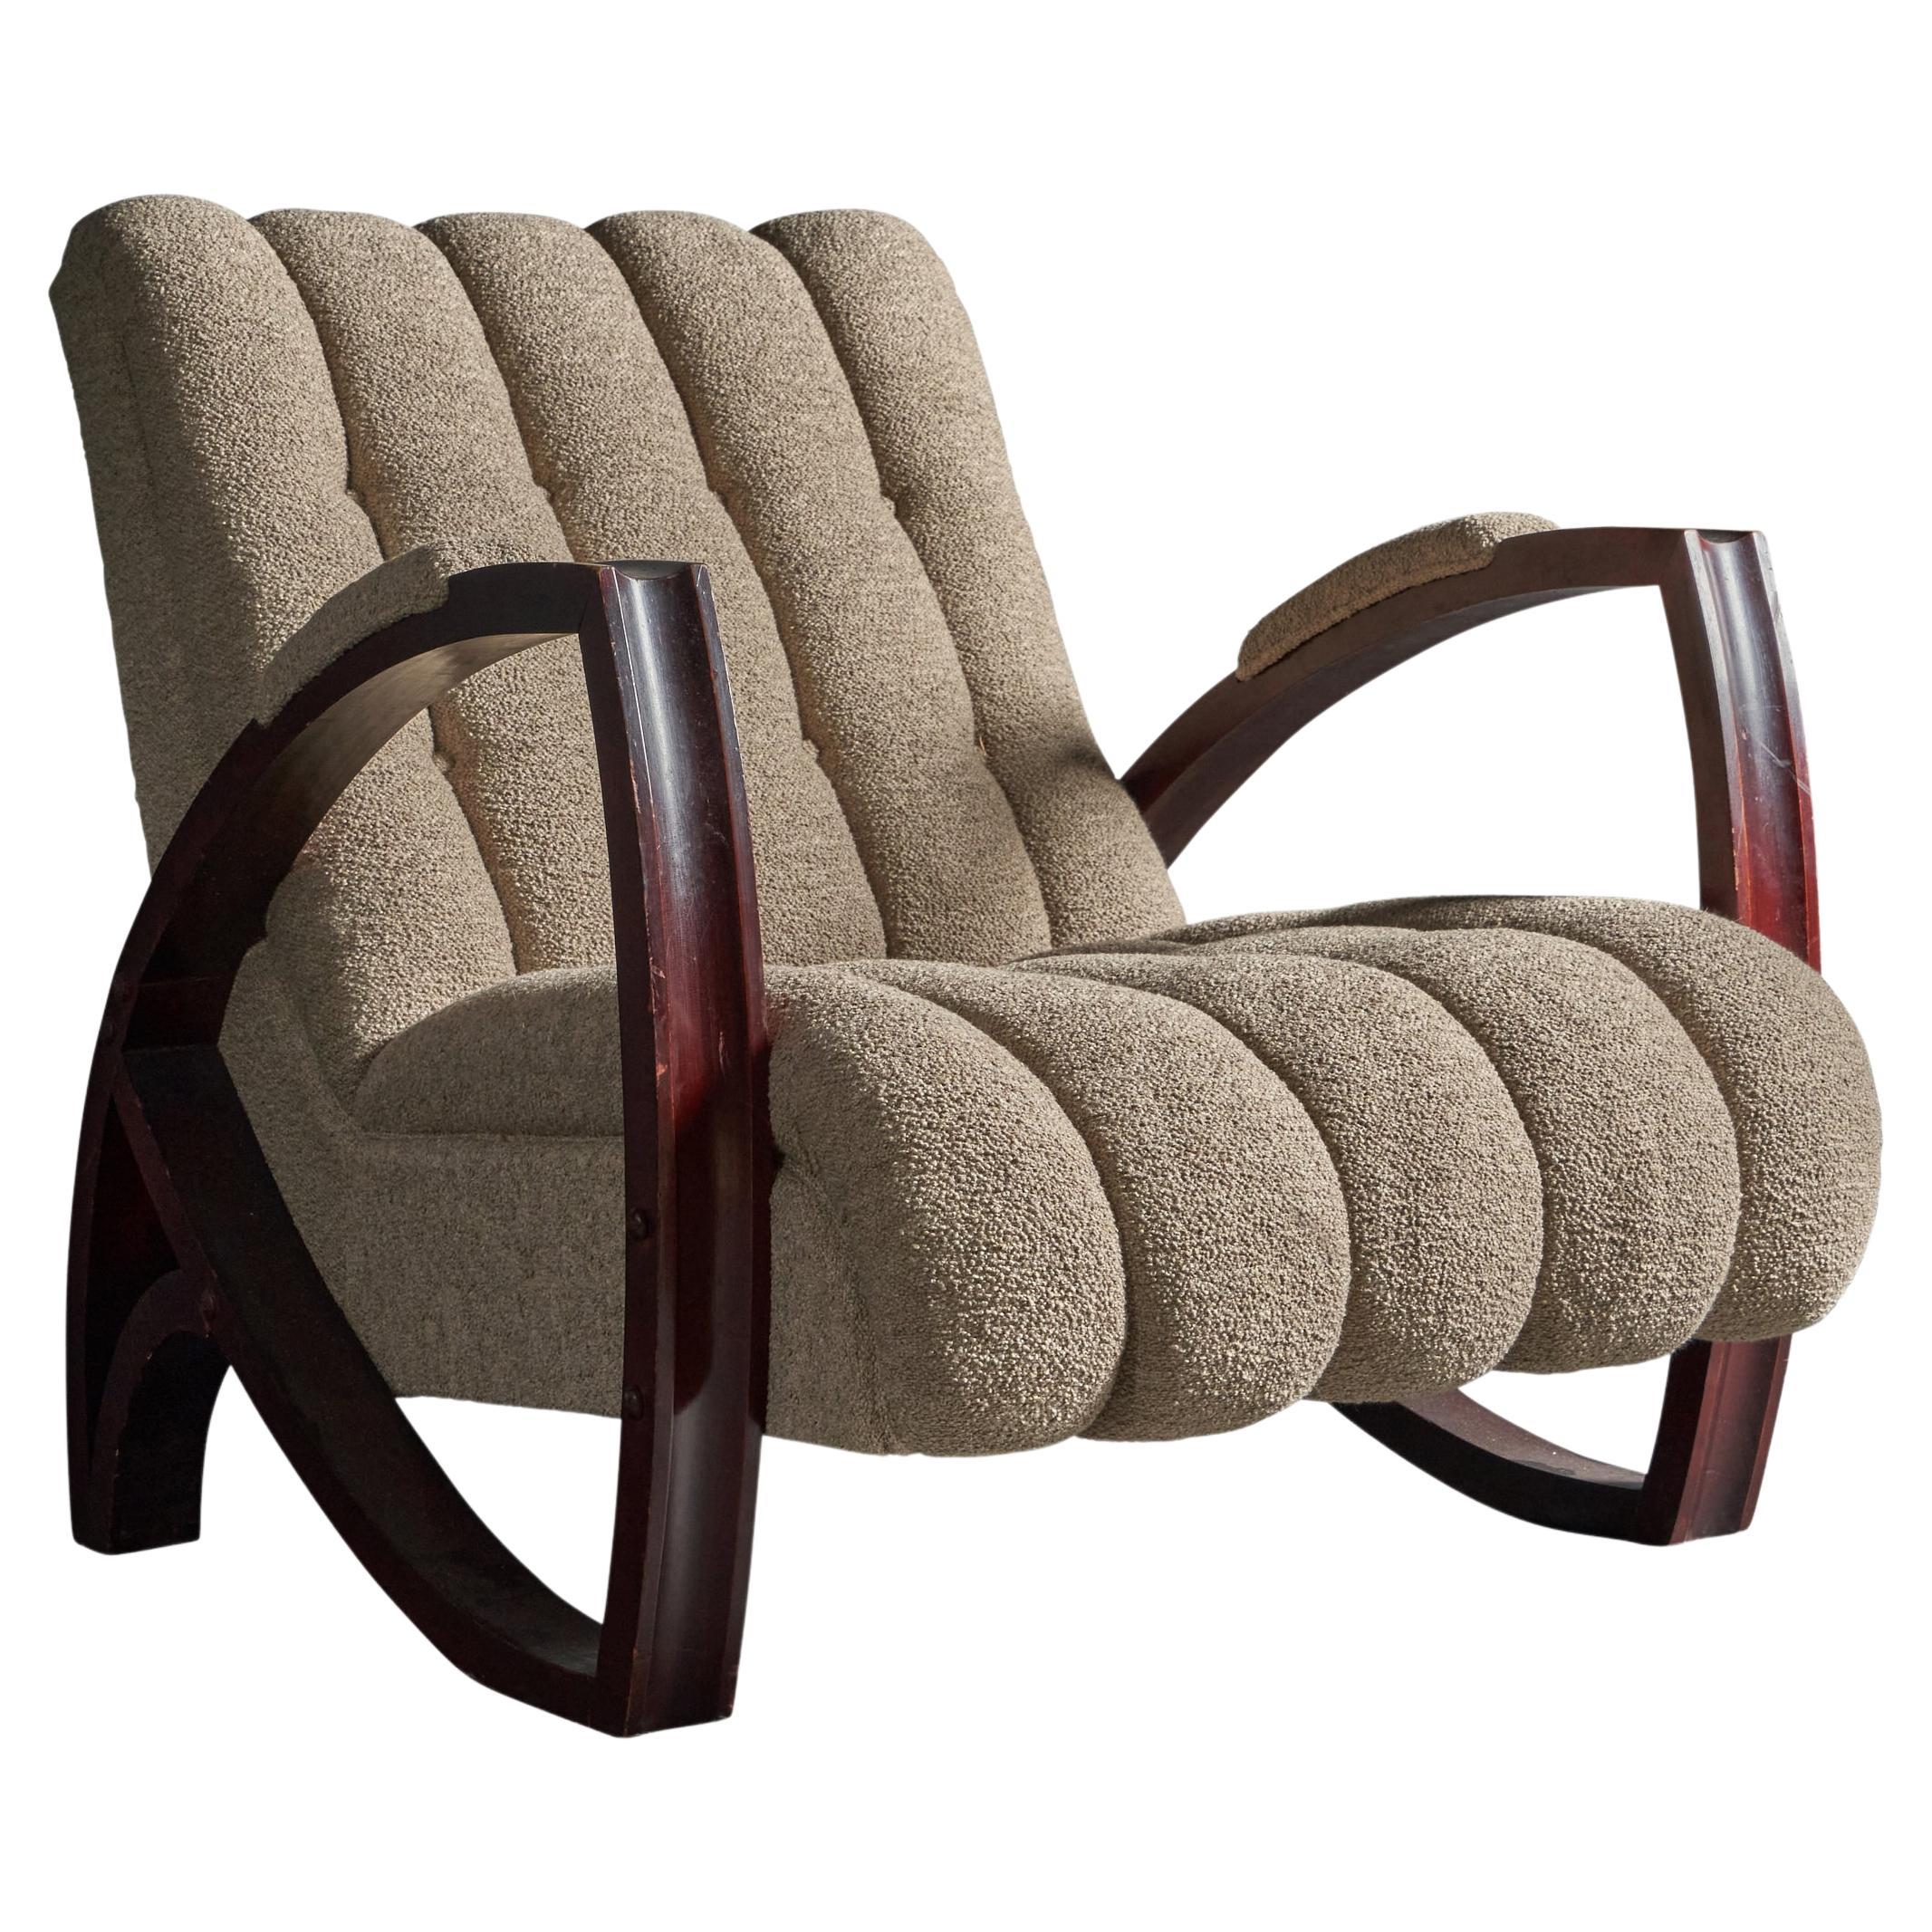 Italian Designer, Lounge Chair, Wood, Fabric, Italy, 1930s For Sale